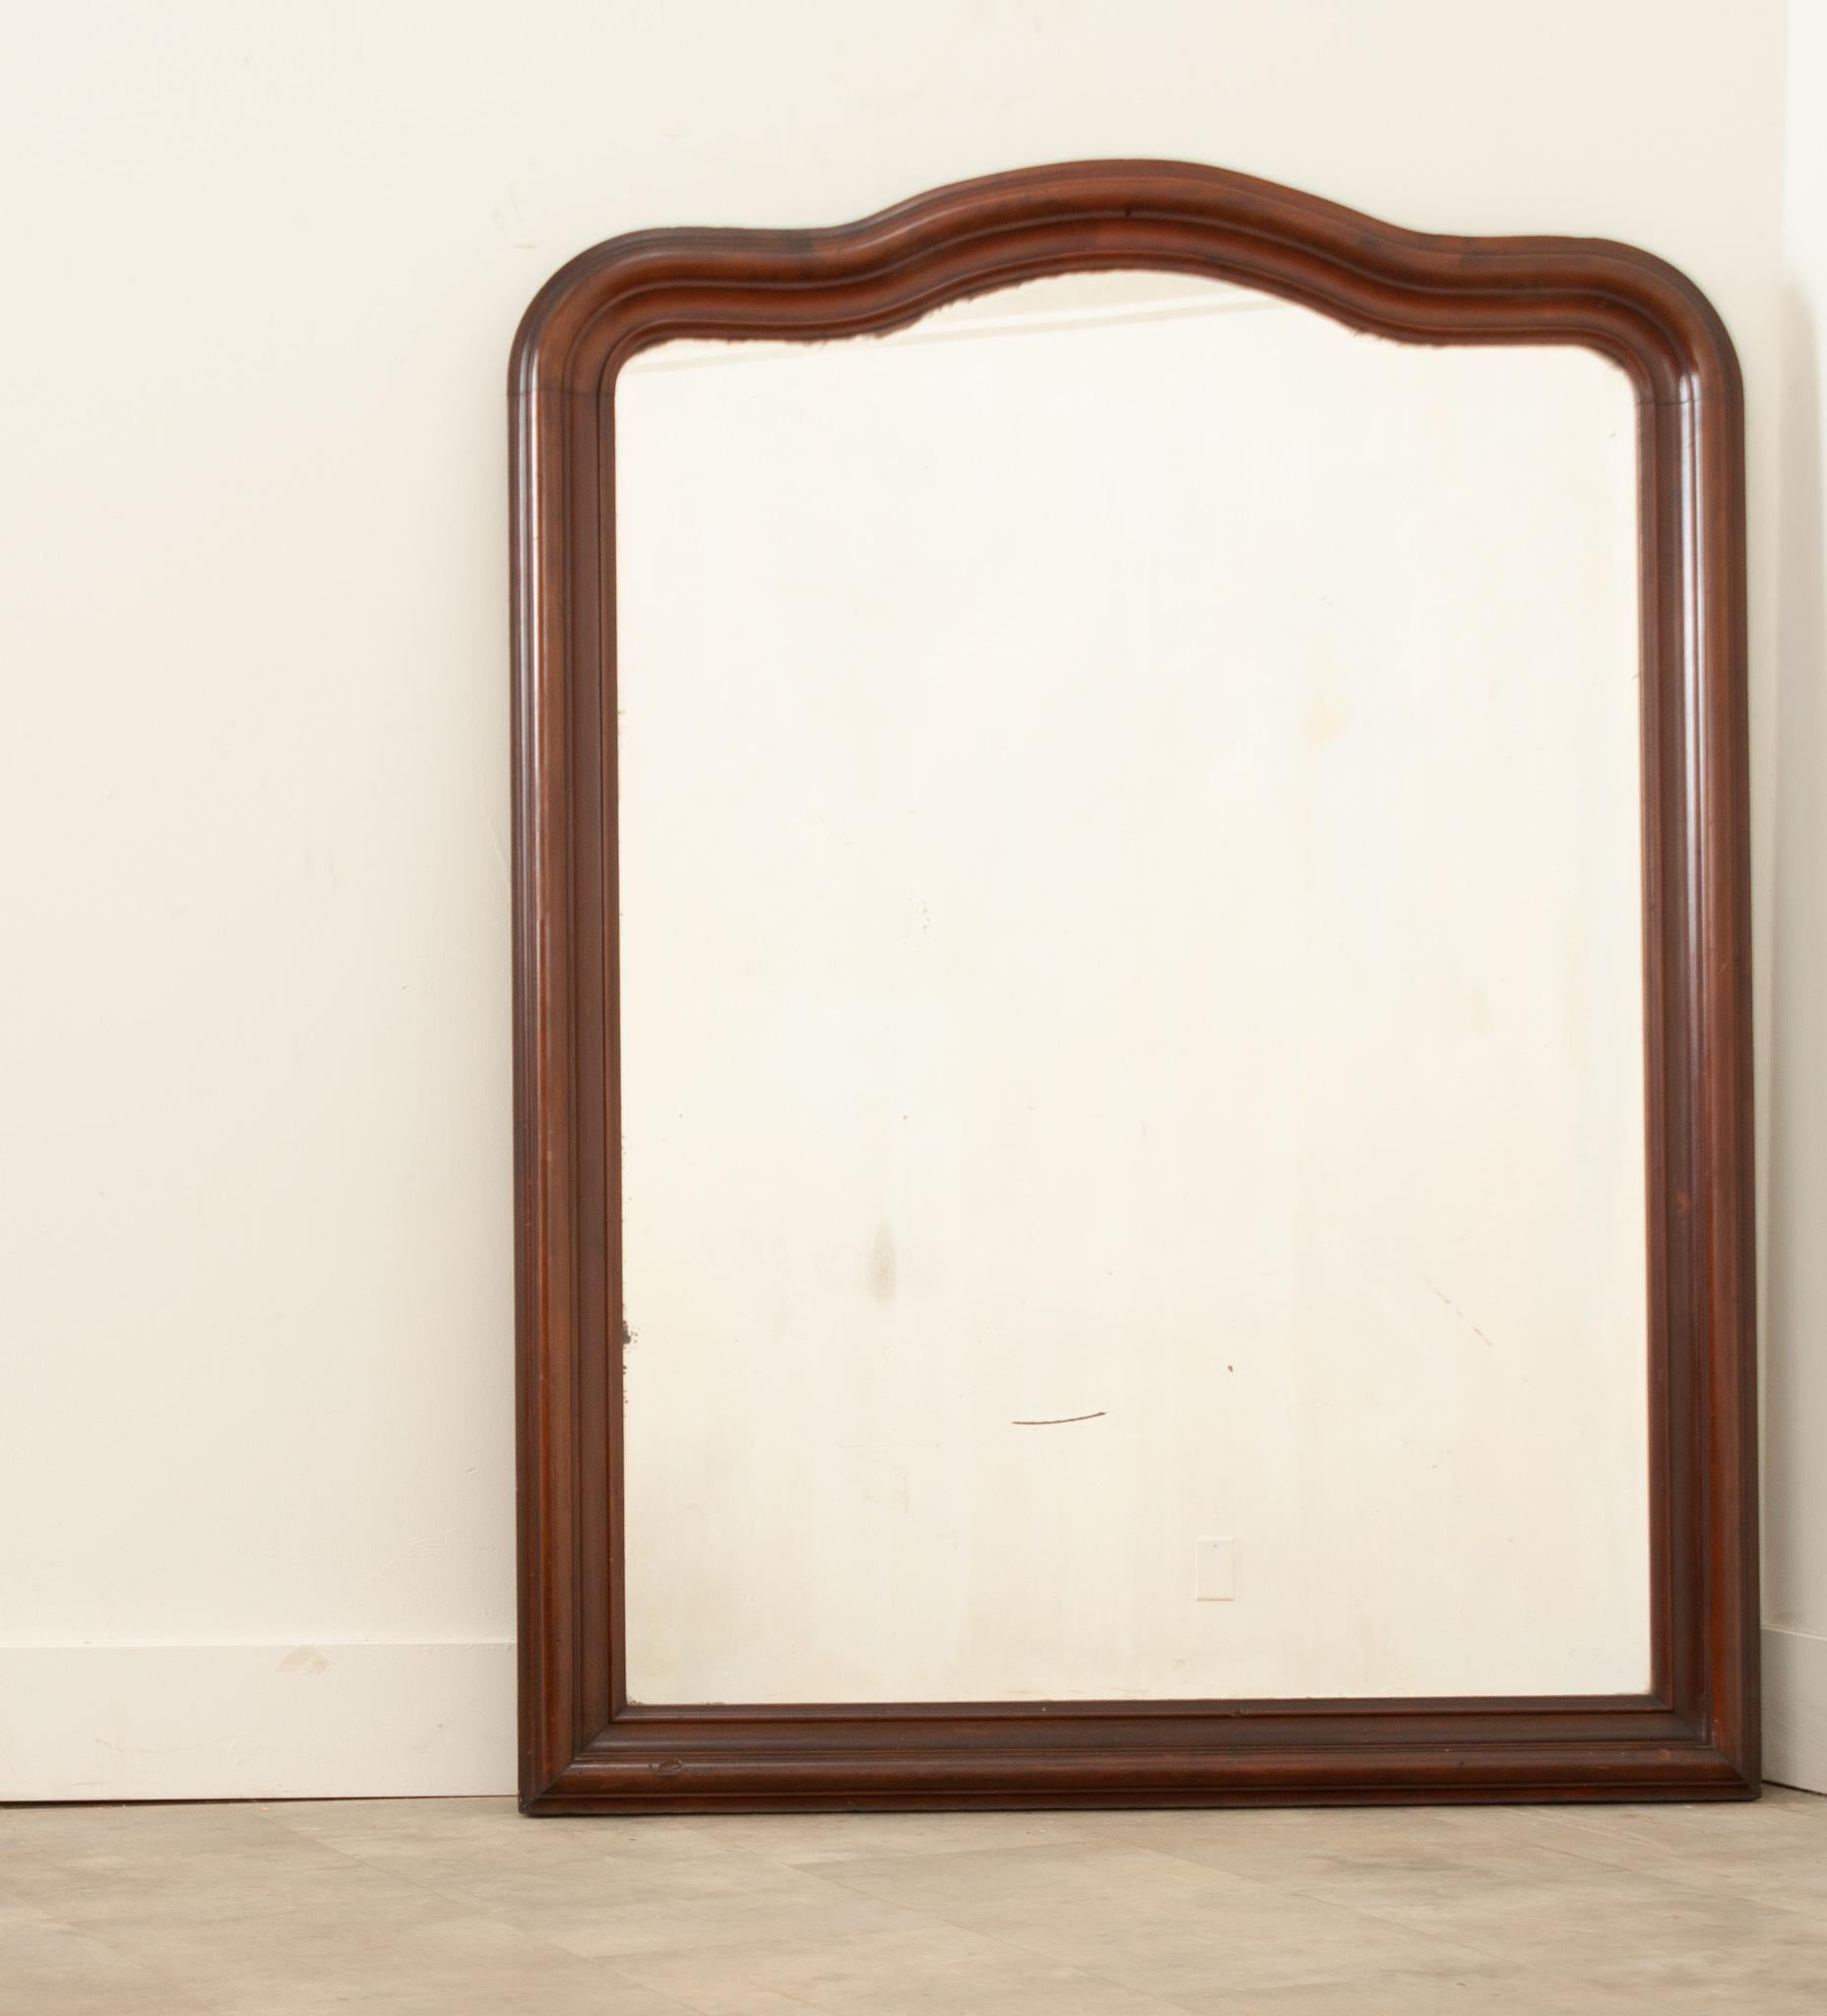 A beautifully shaped  French wall or mantel mirror made of walnut and hand-crafted in France in the 19th century.  This elegant mirror features a fine sculptural design with flowing shapes and lines. The molded wood frame is a rich brown color and